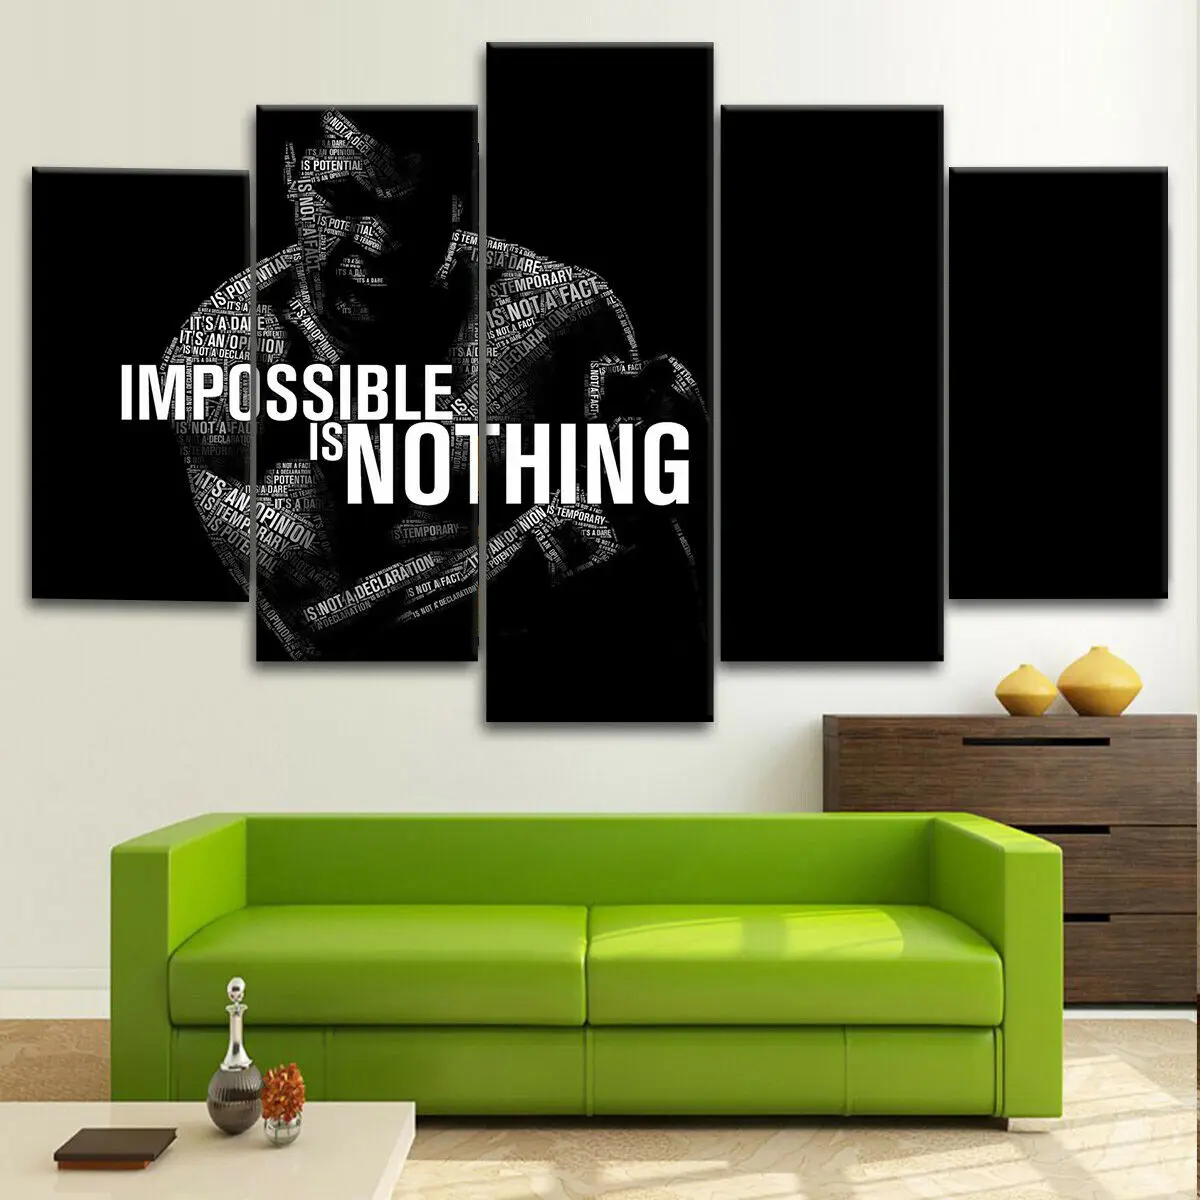 

No Framed Muhammad Ali Motivation Quote 5 piece Wall Art Canvas Print Posters Paintings Painting Living Room Home Decor Pictures